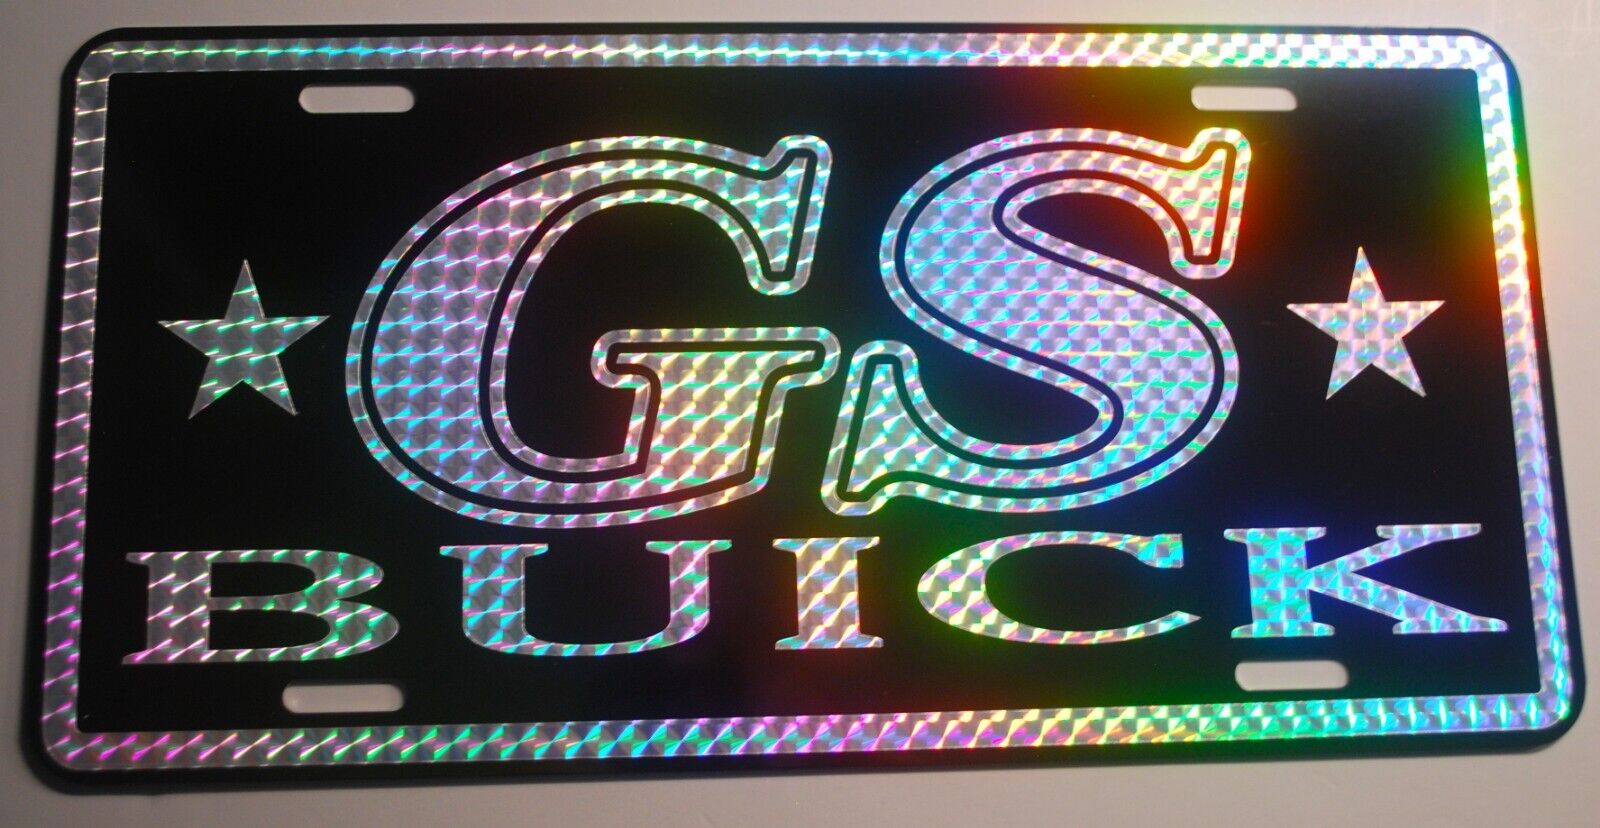 GS BUICK Prism Metal License Plate Tag 1970\'s Retro Fits Buick Skylark Riviera